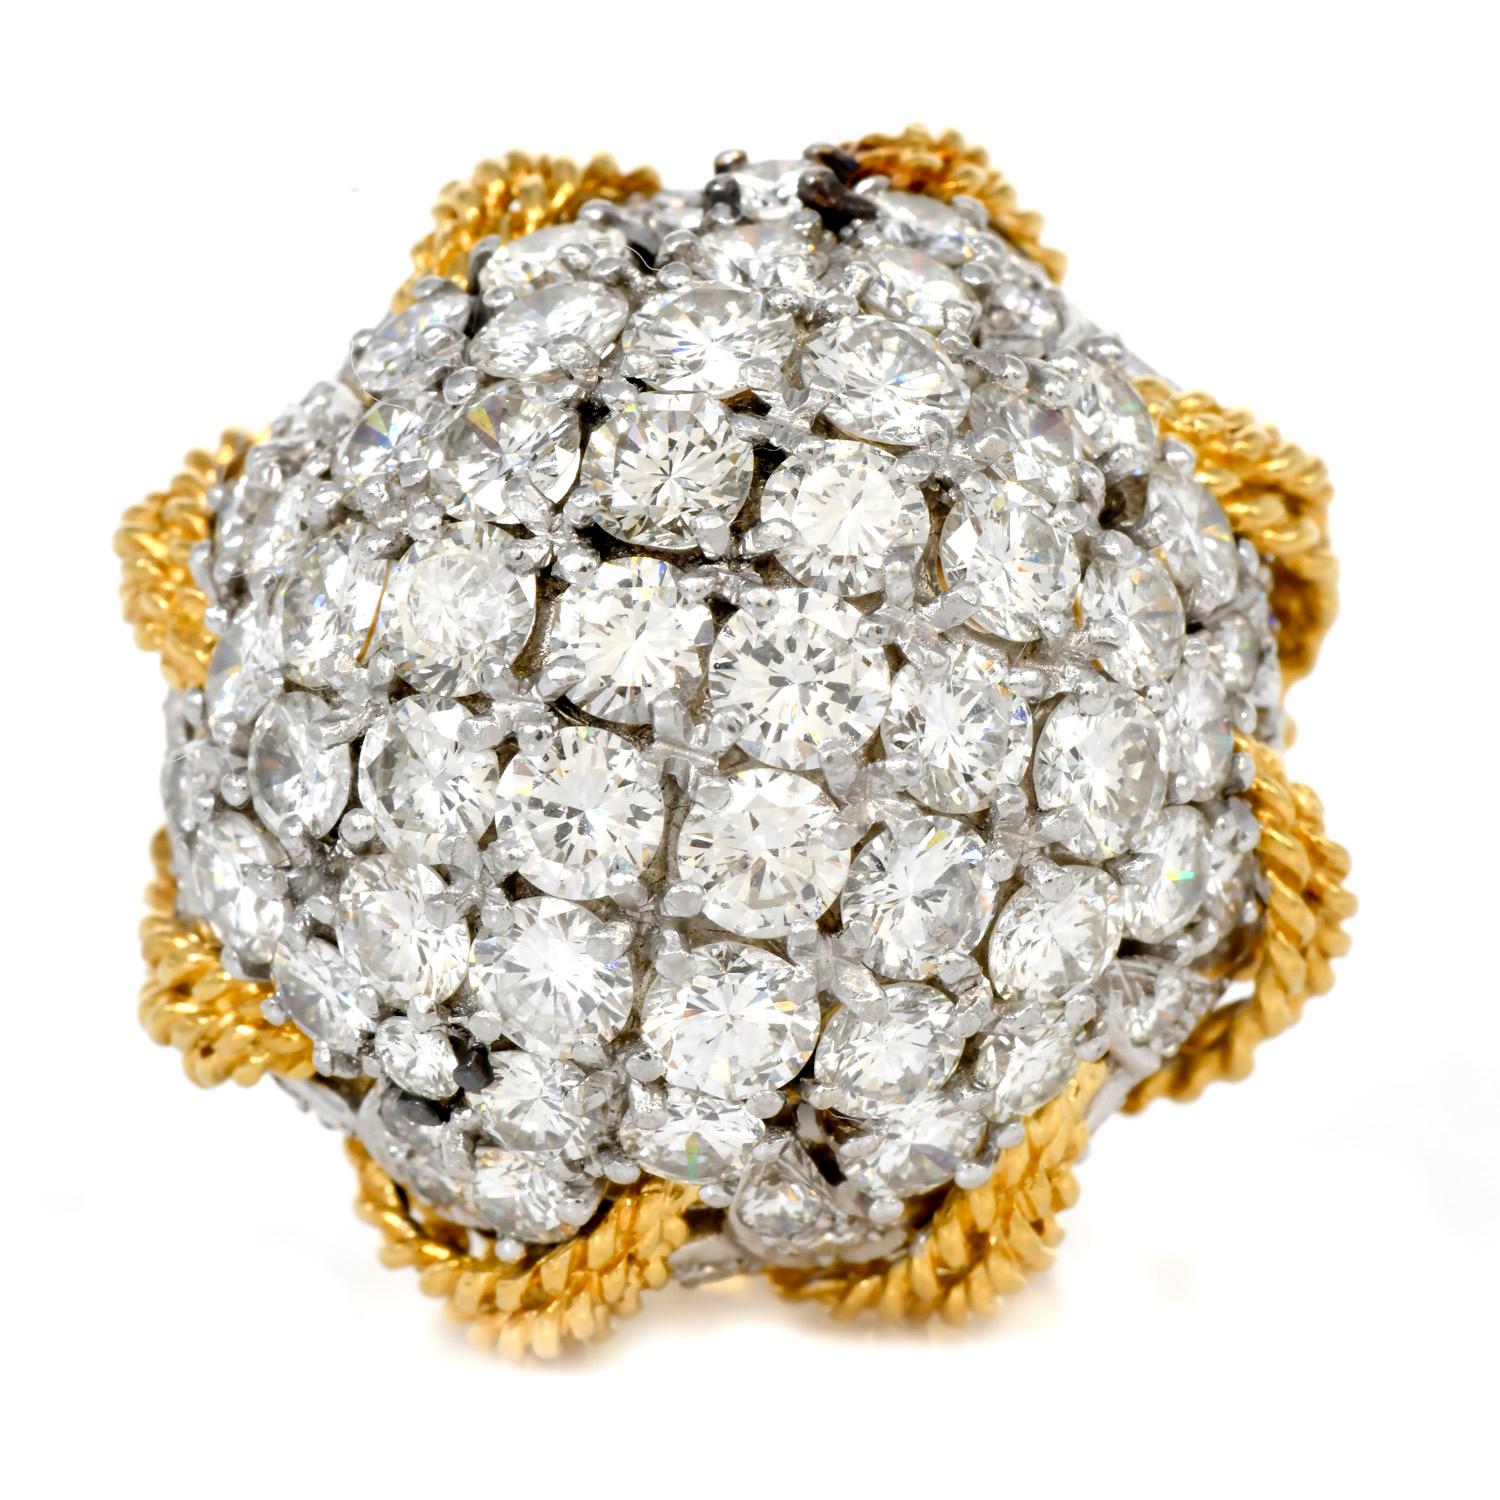 This Stunning ring with pave diamonds is designed as a bombé plaque, prong-set with large round-faceted high-quality diamonds set in solid platinum. The rope design body and shank is crafted in solid 18K yellow gold, and the center is